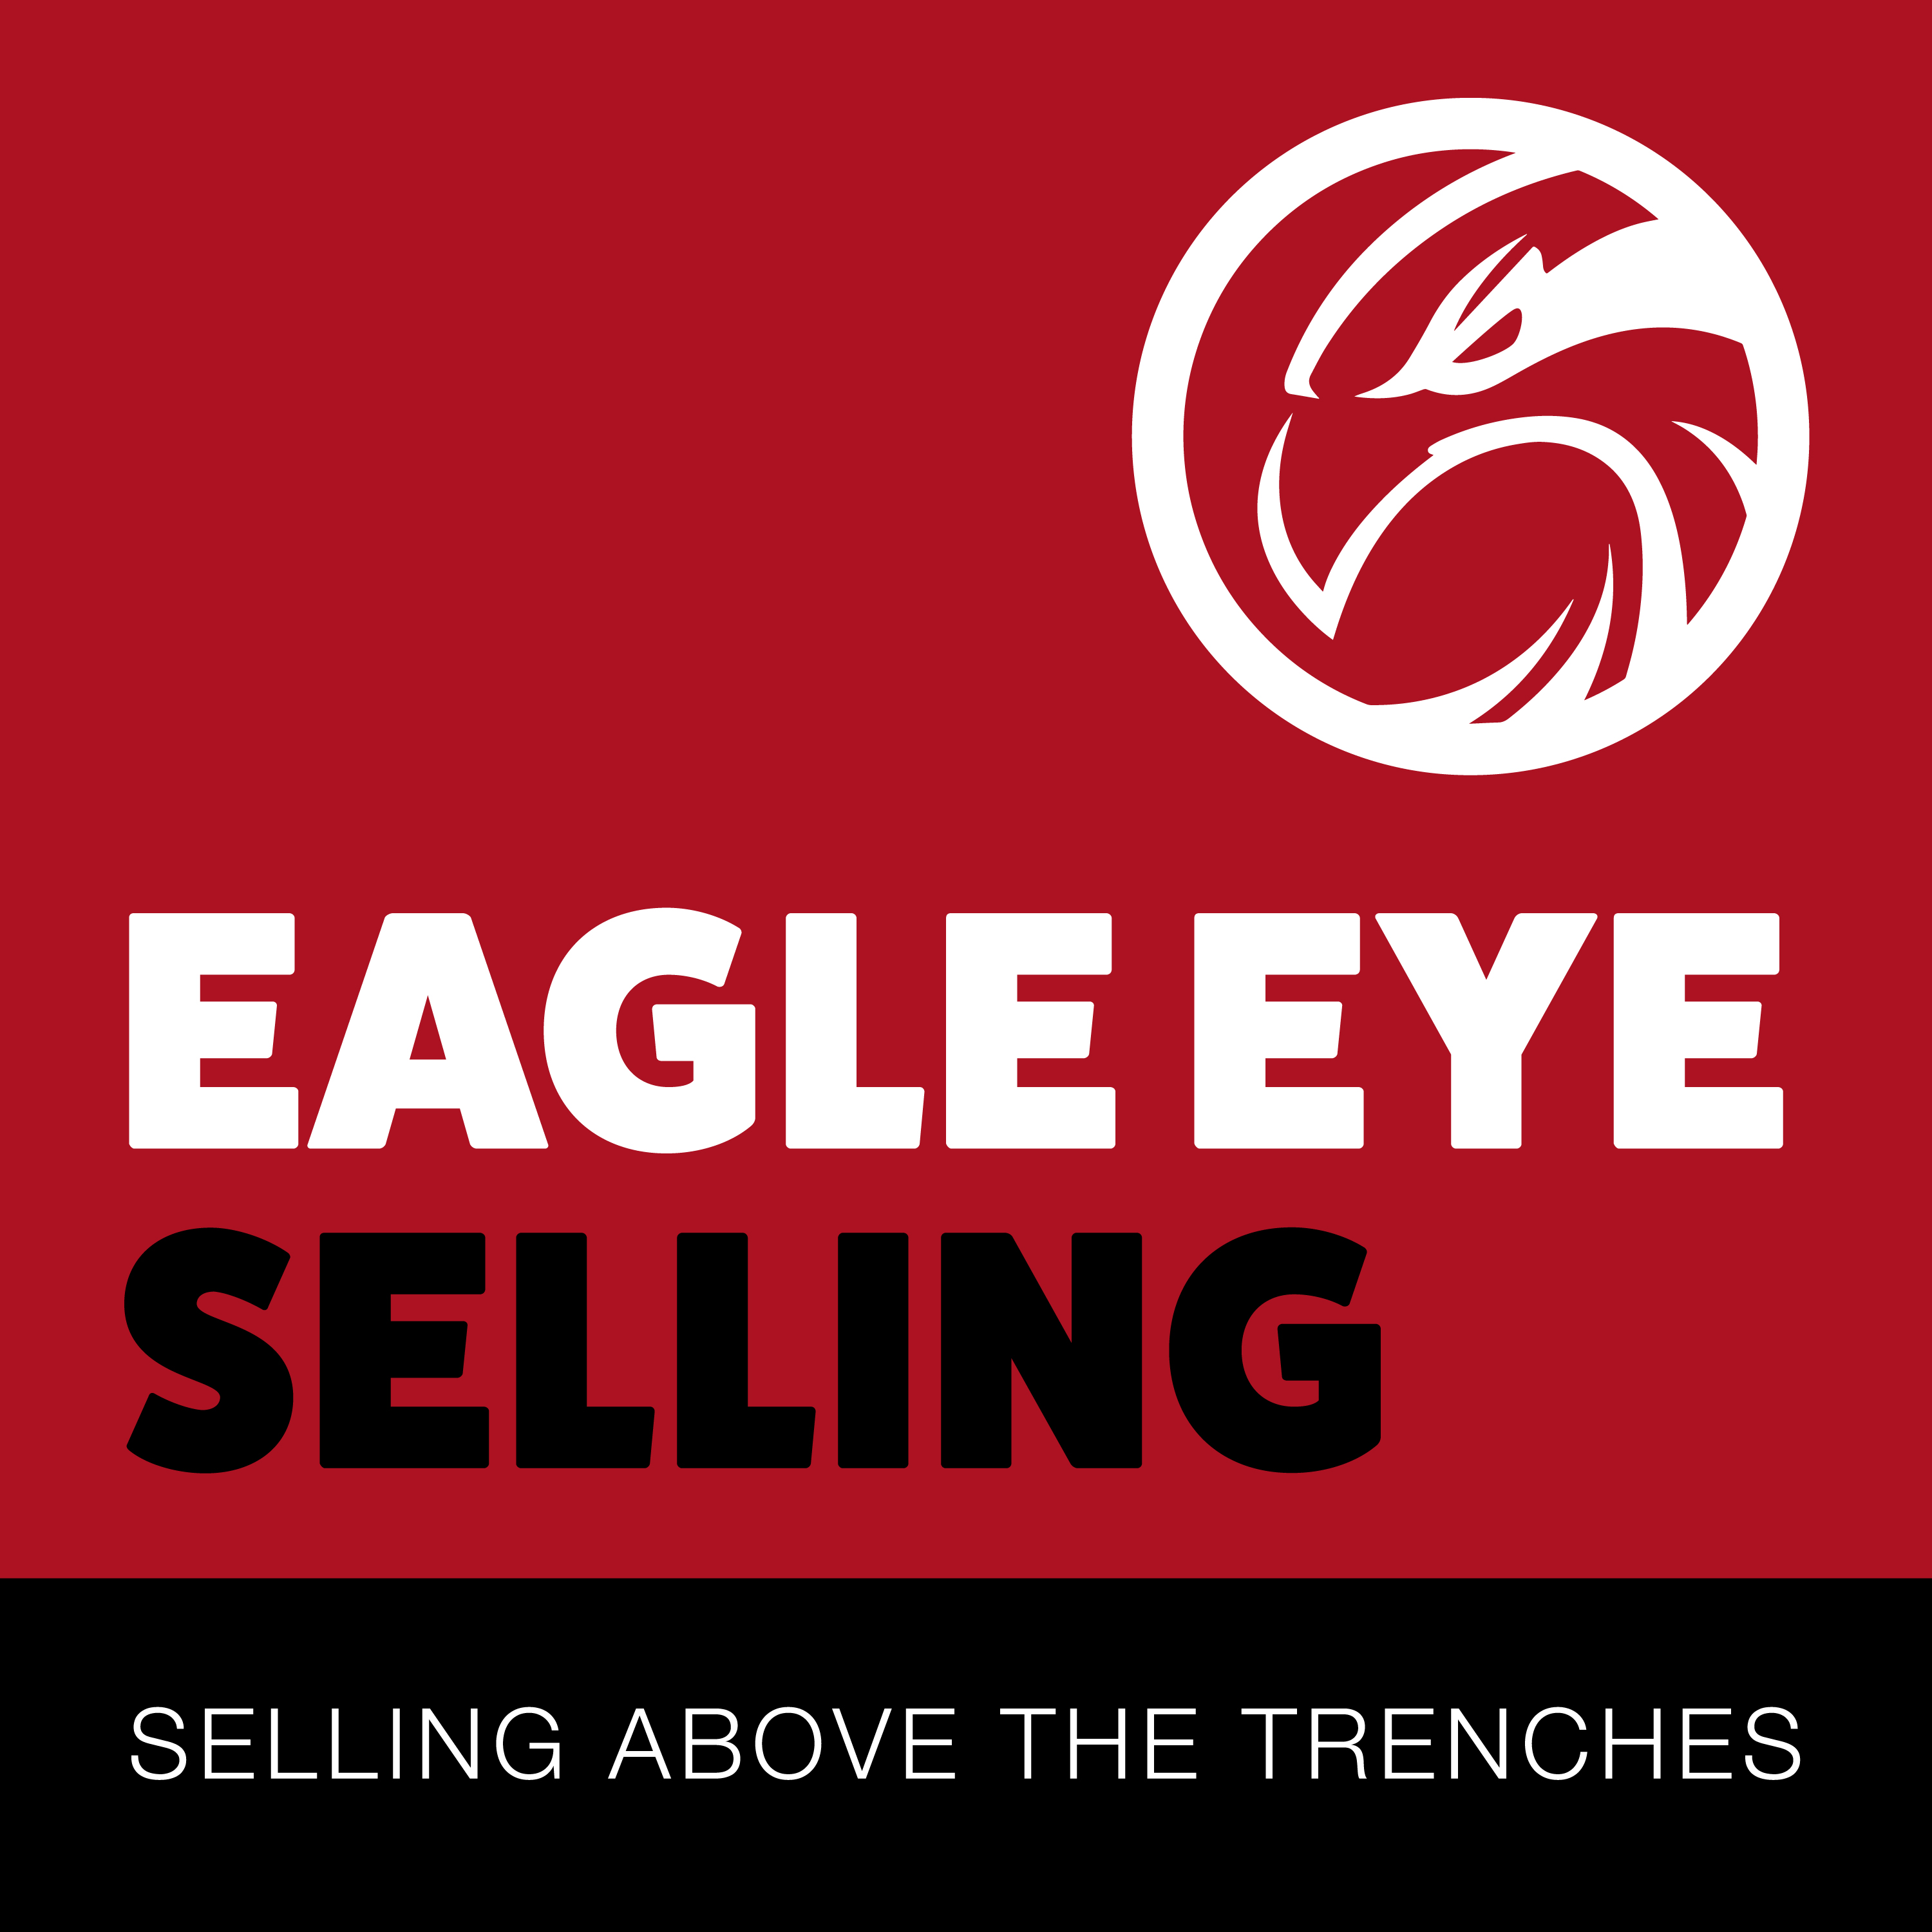 Eagle Eye Selling - Selling Above the Trenches